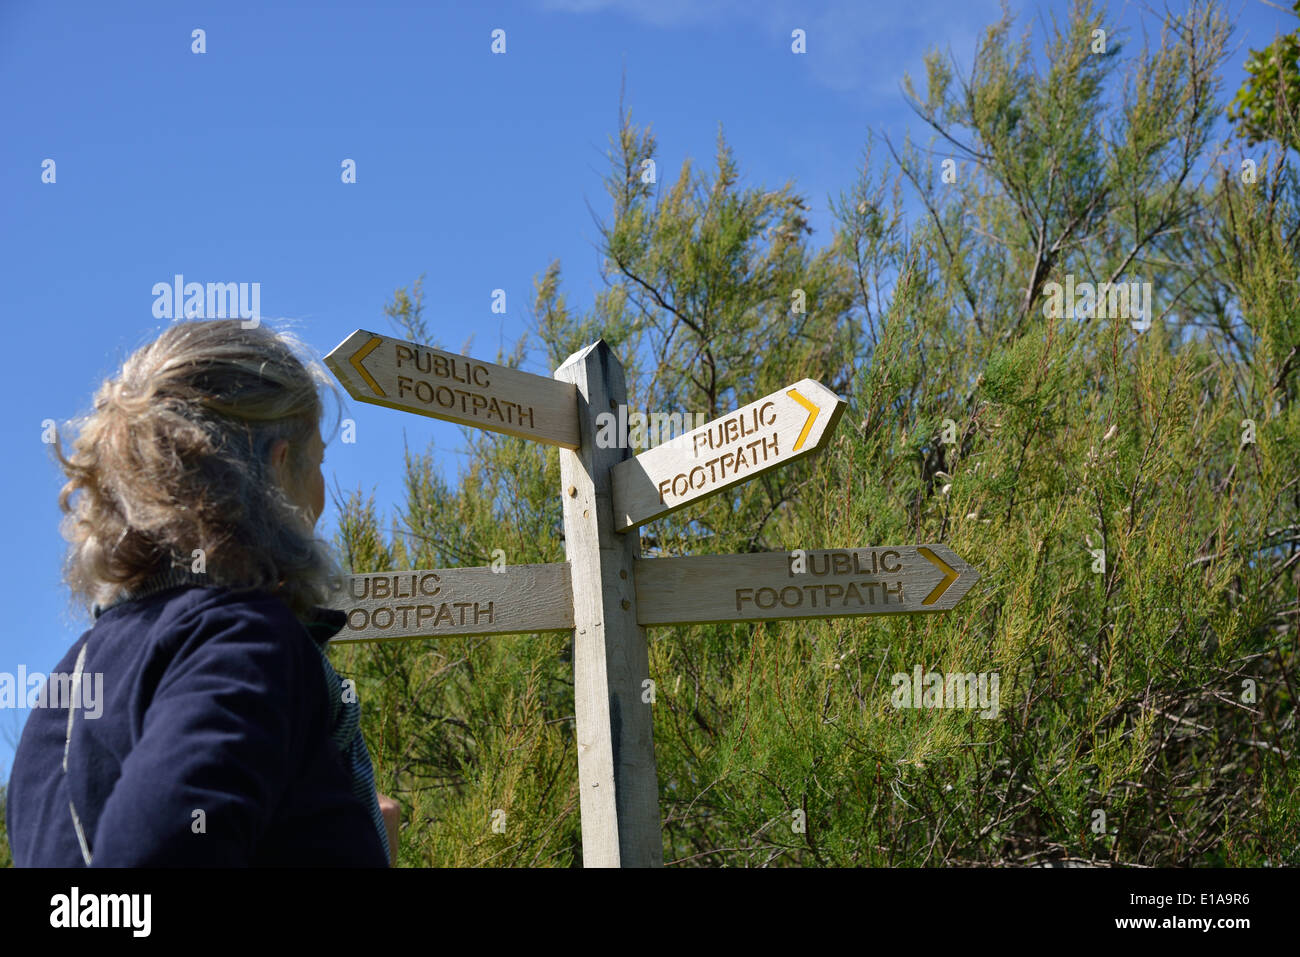 Woman making a choice of direction standing beside a public foothpath sign at Snow Hill, West Wittering, West Sussex,UK Stock Photo